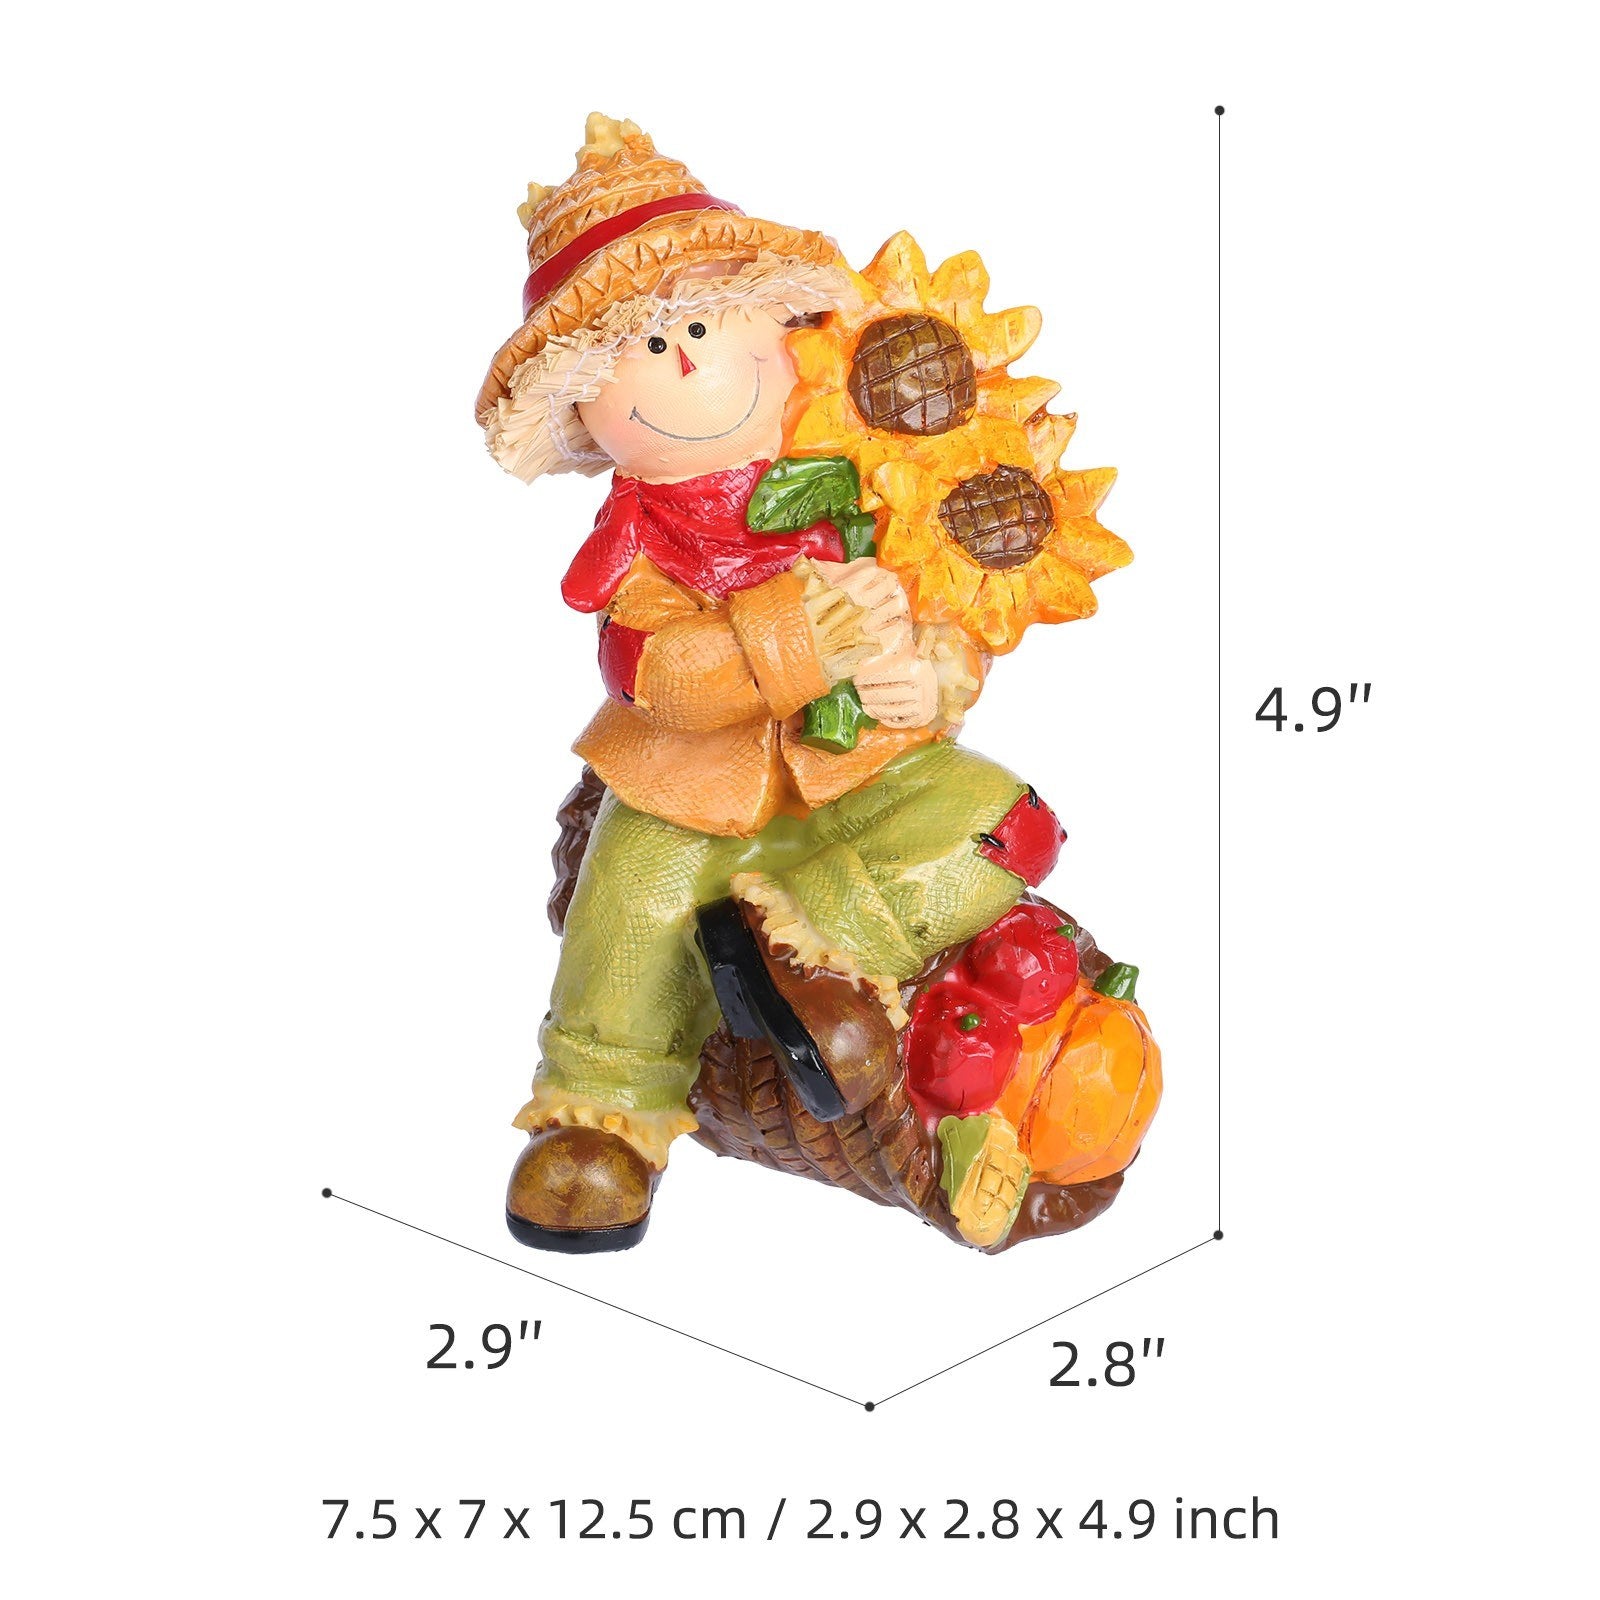 This harvest boy figurine is so cute and so sweet for thanksgiving